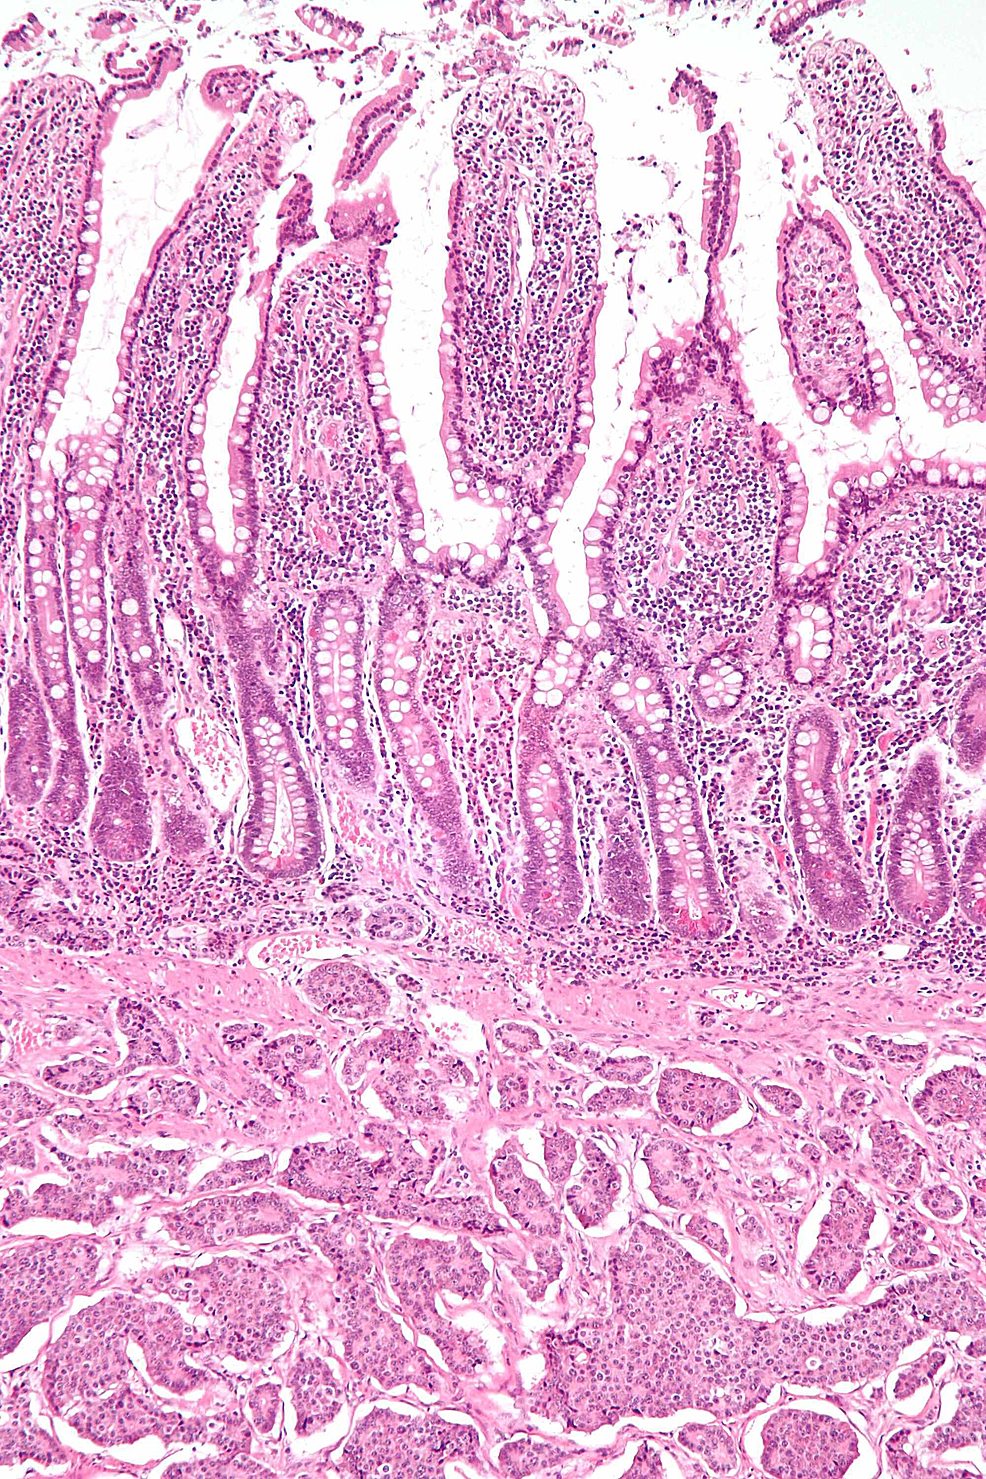 Histopathology-of-a-neuroendocrine-tumor-of-the-small-bowel-(H&E-stain)